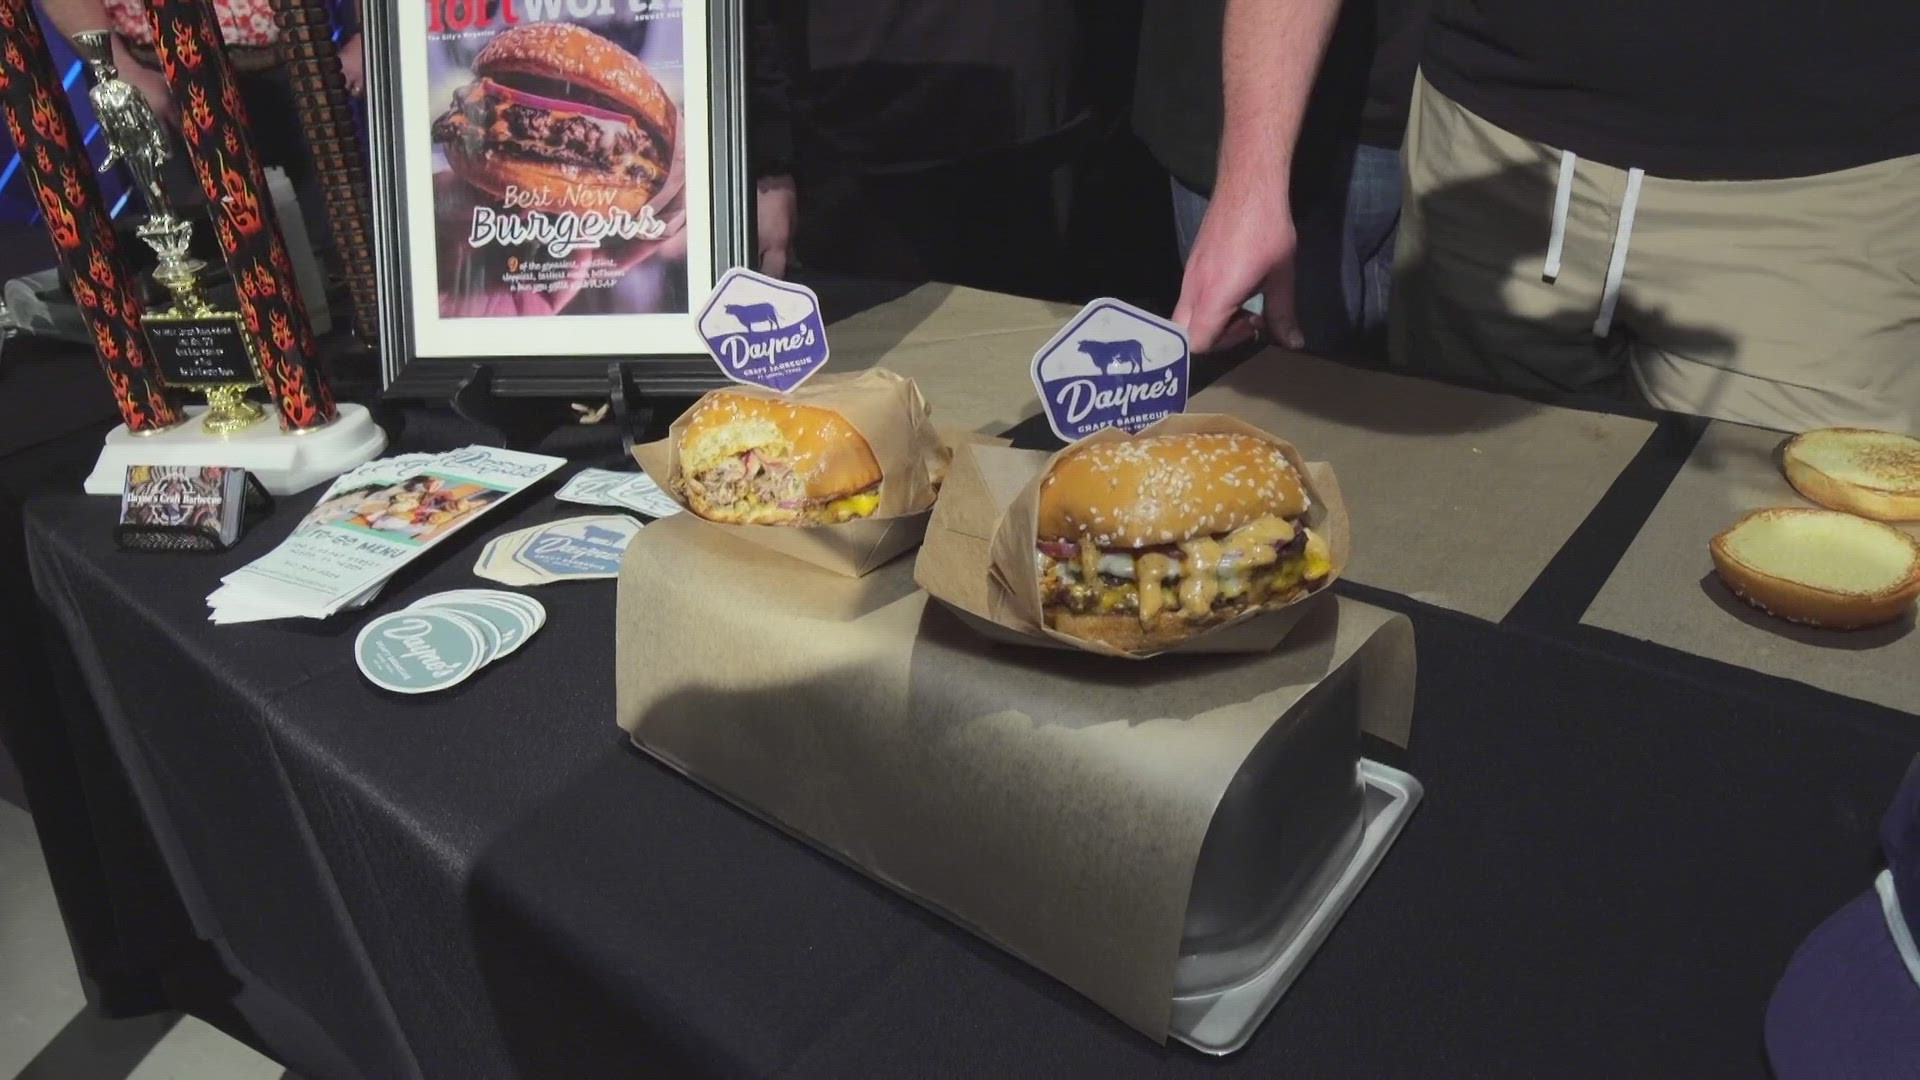 Trey Chapman joined Sean Giggy for a taste test of contenders for the Best Burger in North Texas.